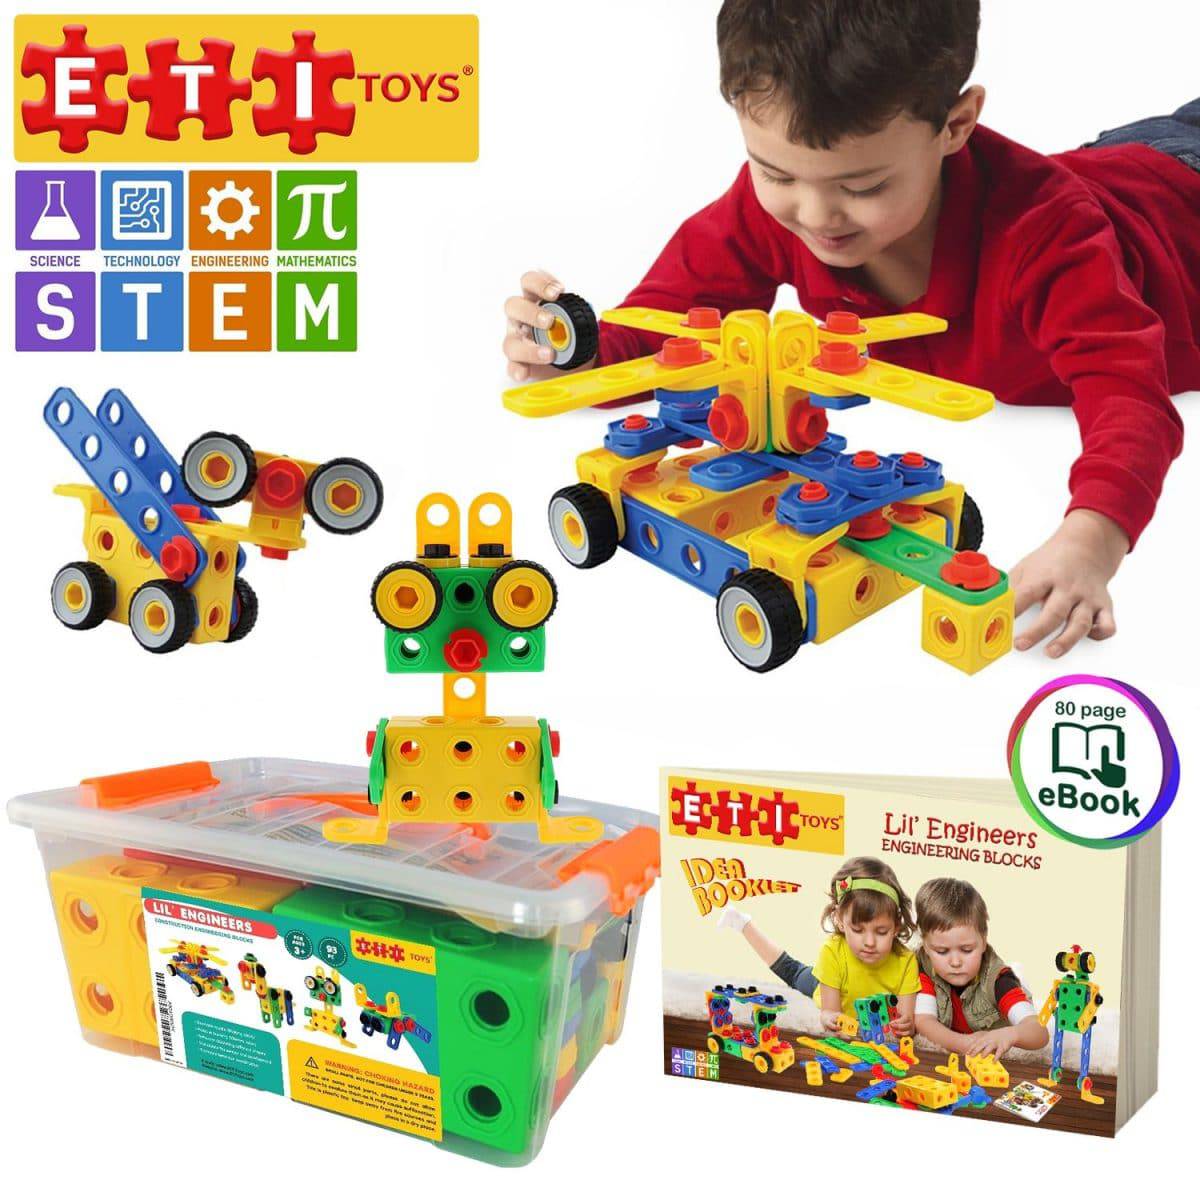 educative toys for toddlers